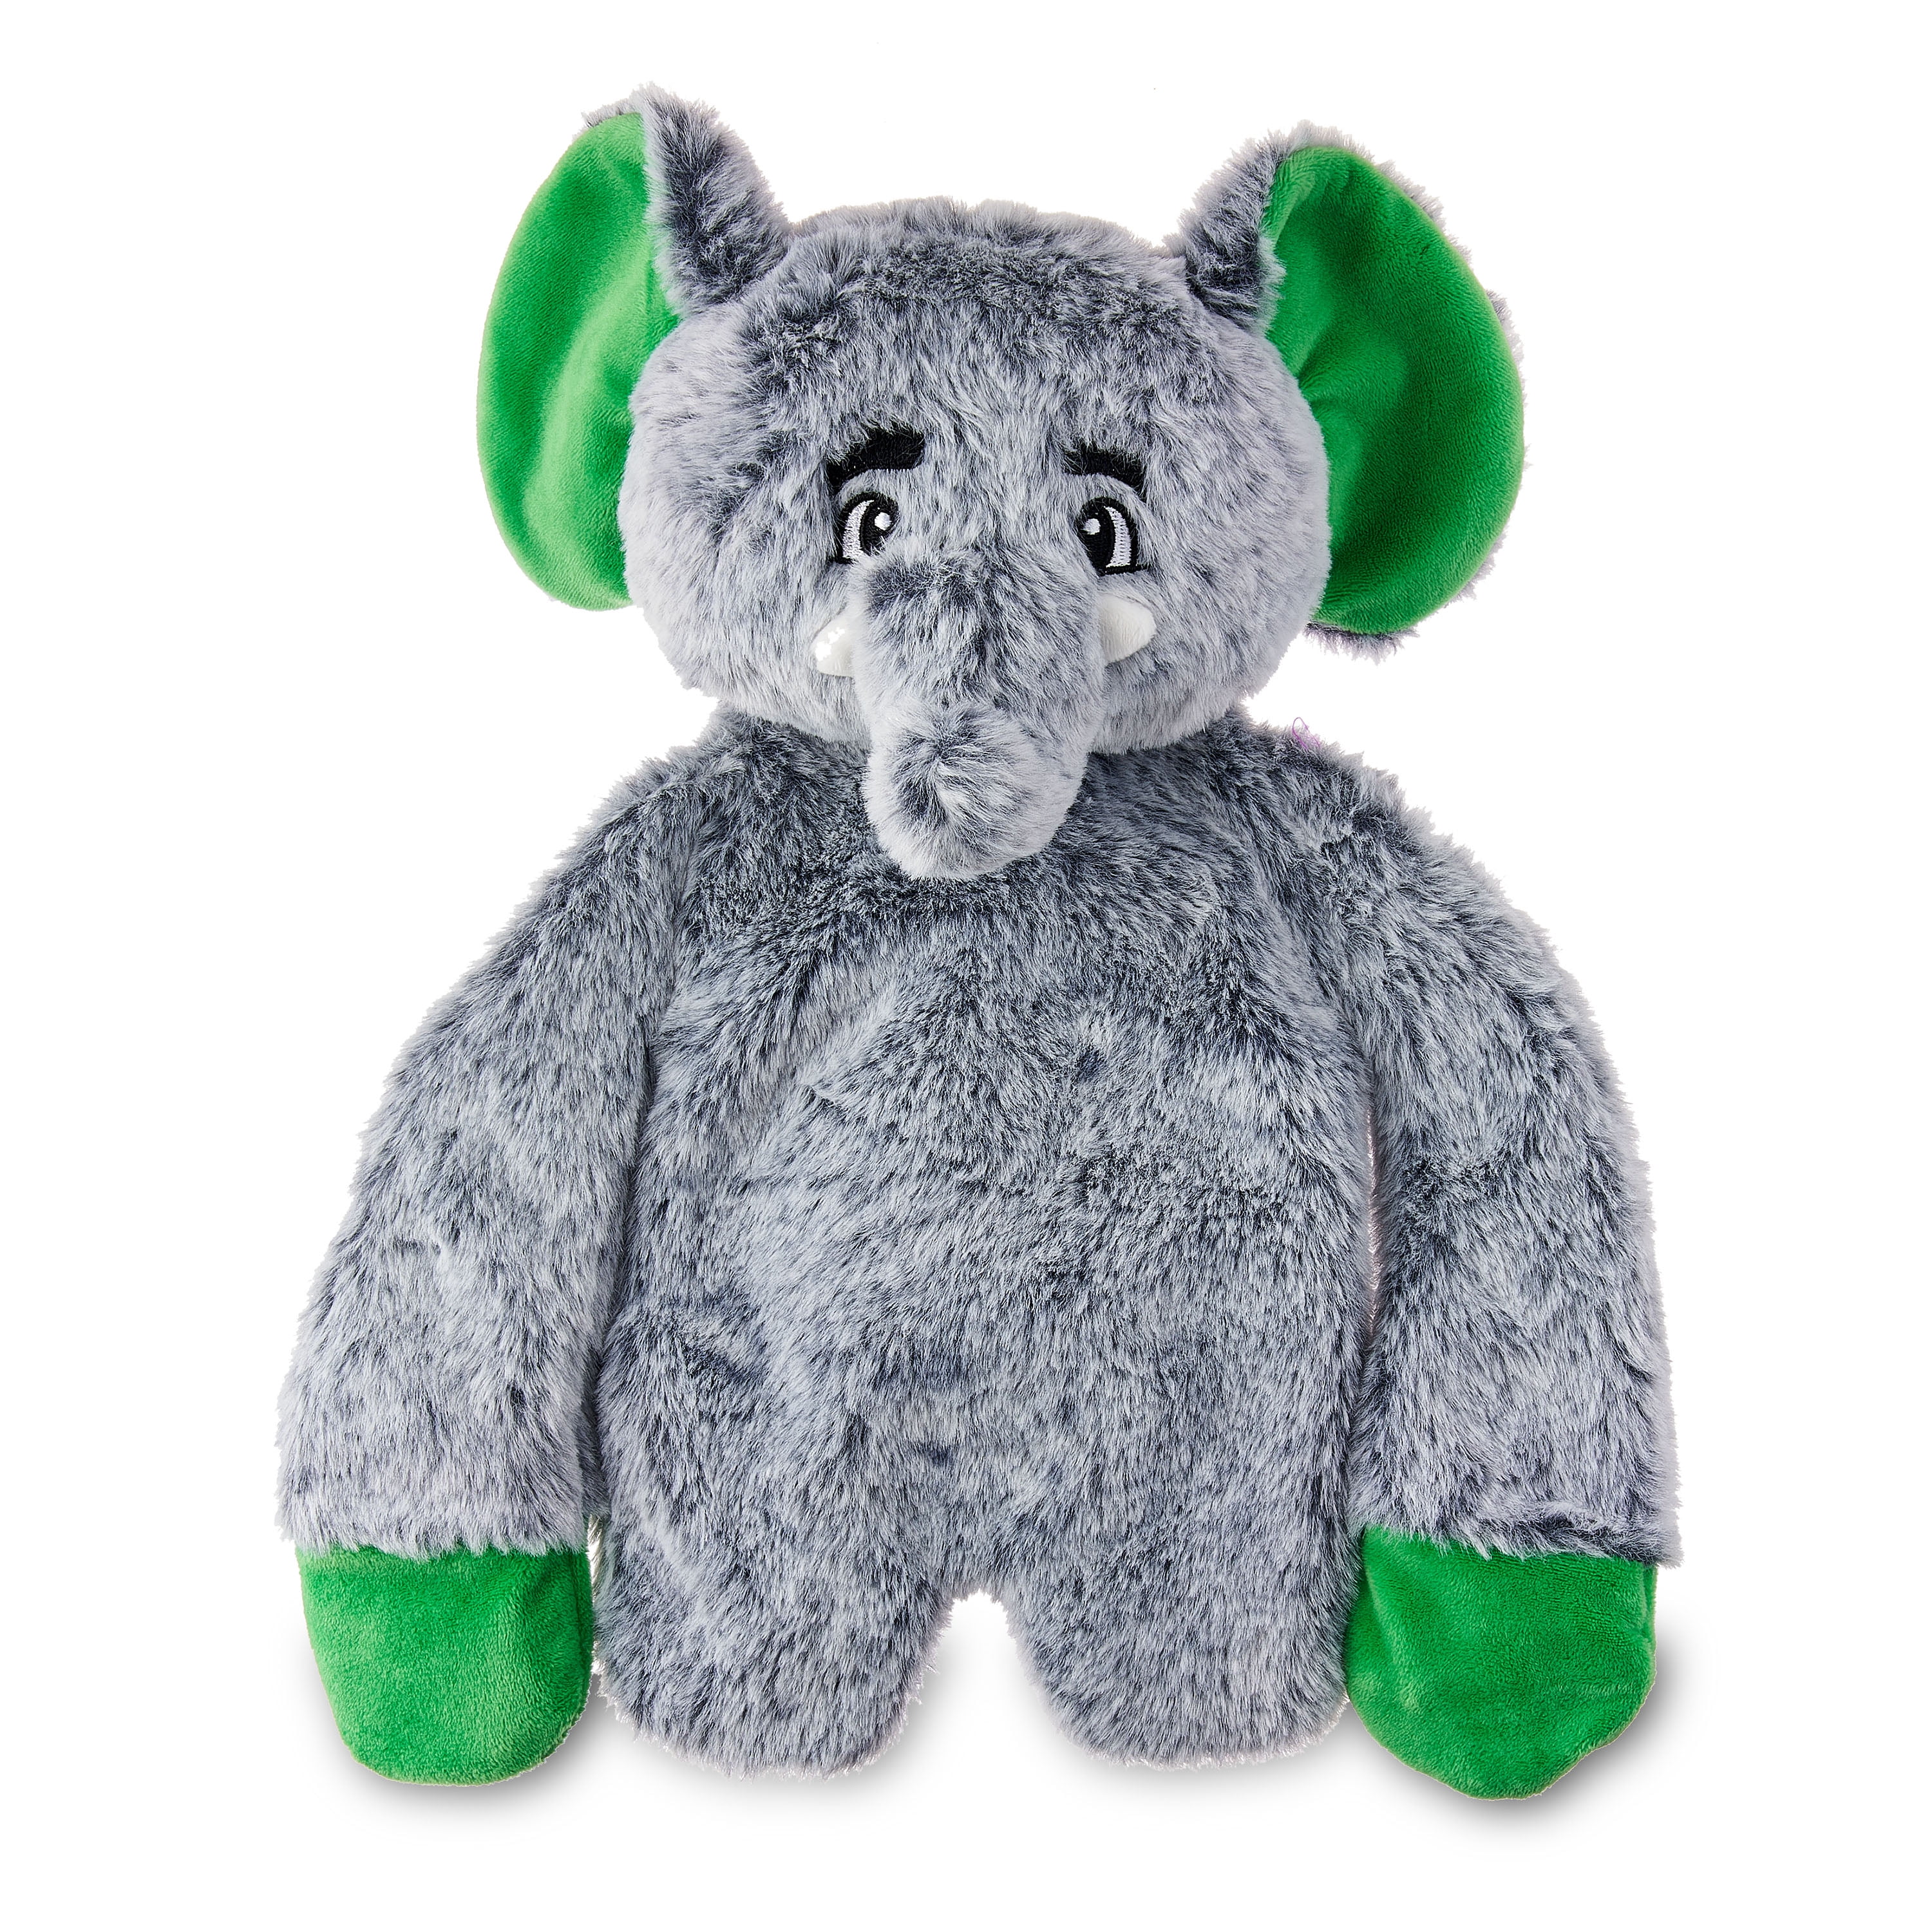 7 Best Plush Dog Toys For Soft, Friendly Play (60+ Reviewed